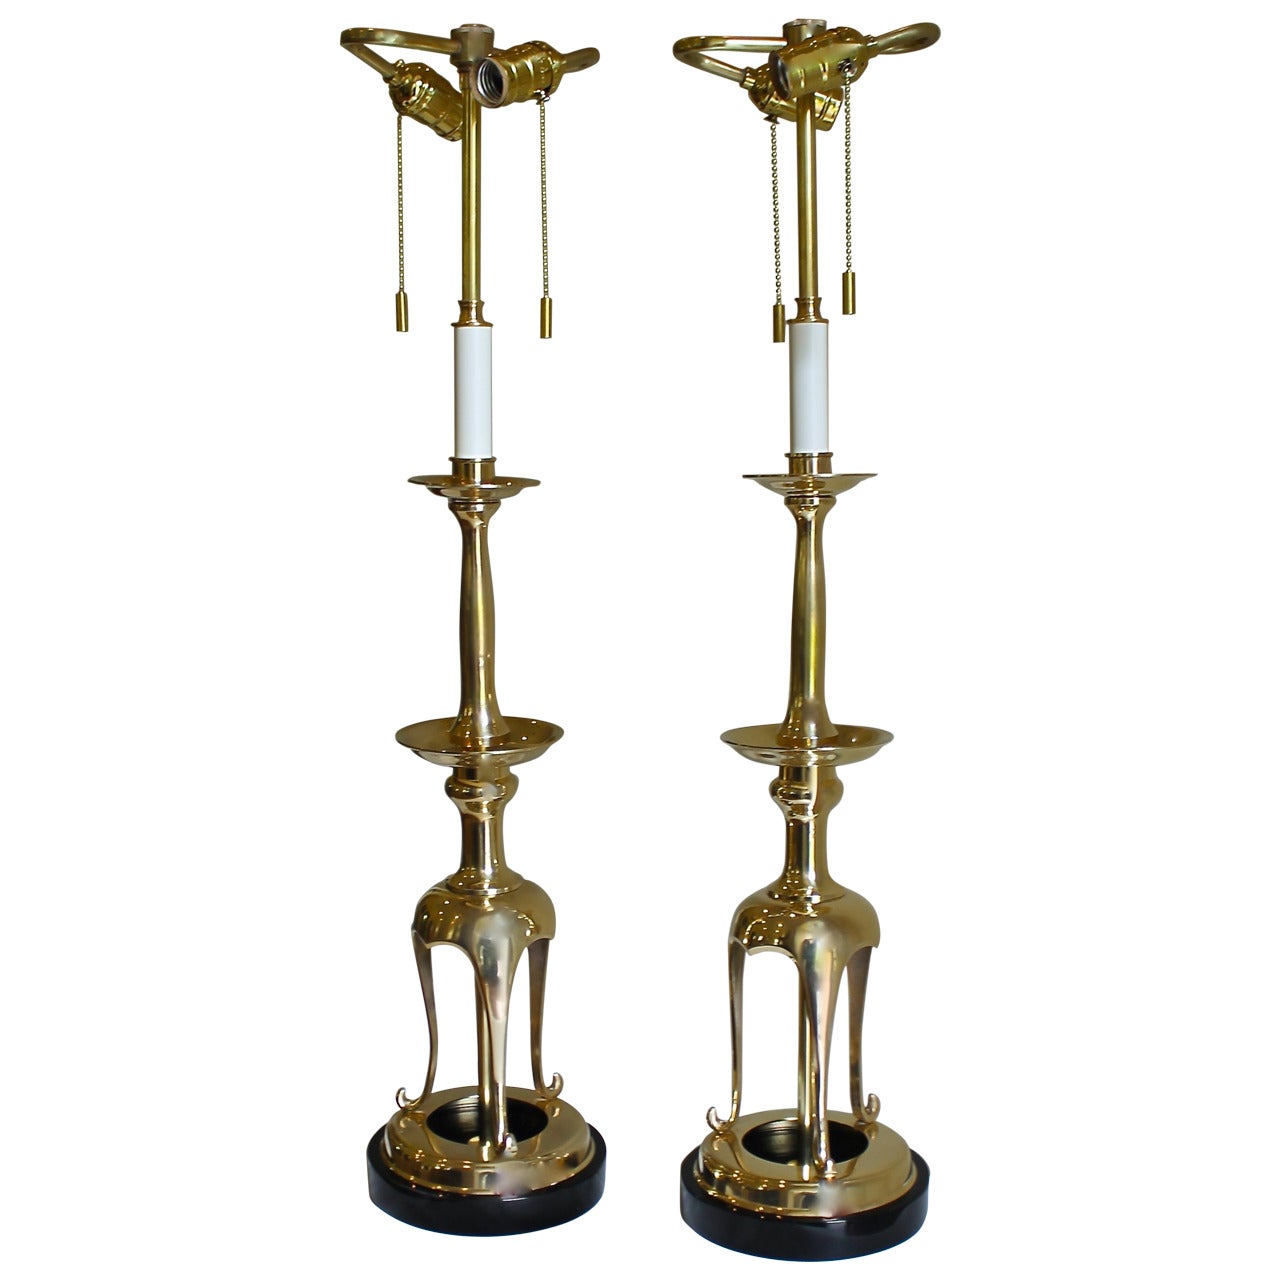 Pair of Brass, Japanese Candlestick Lamps